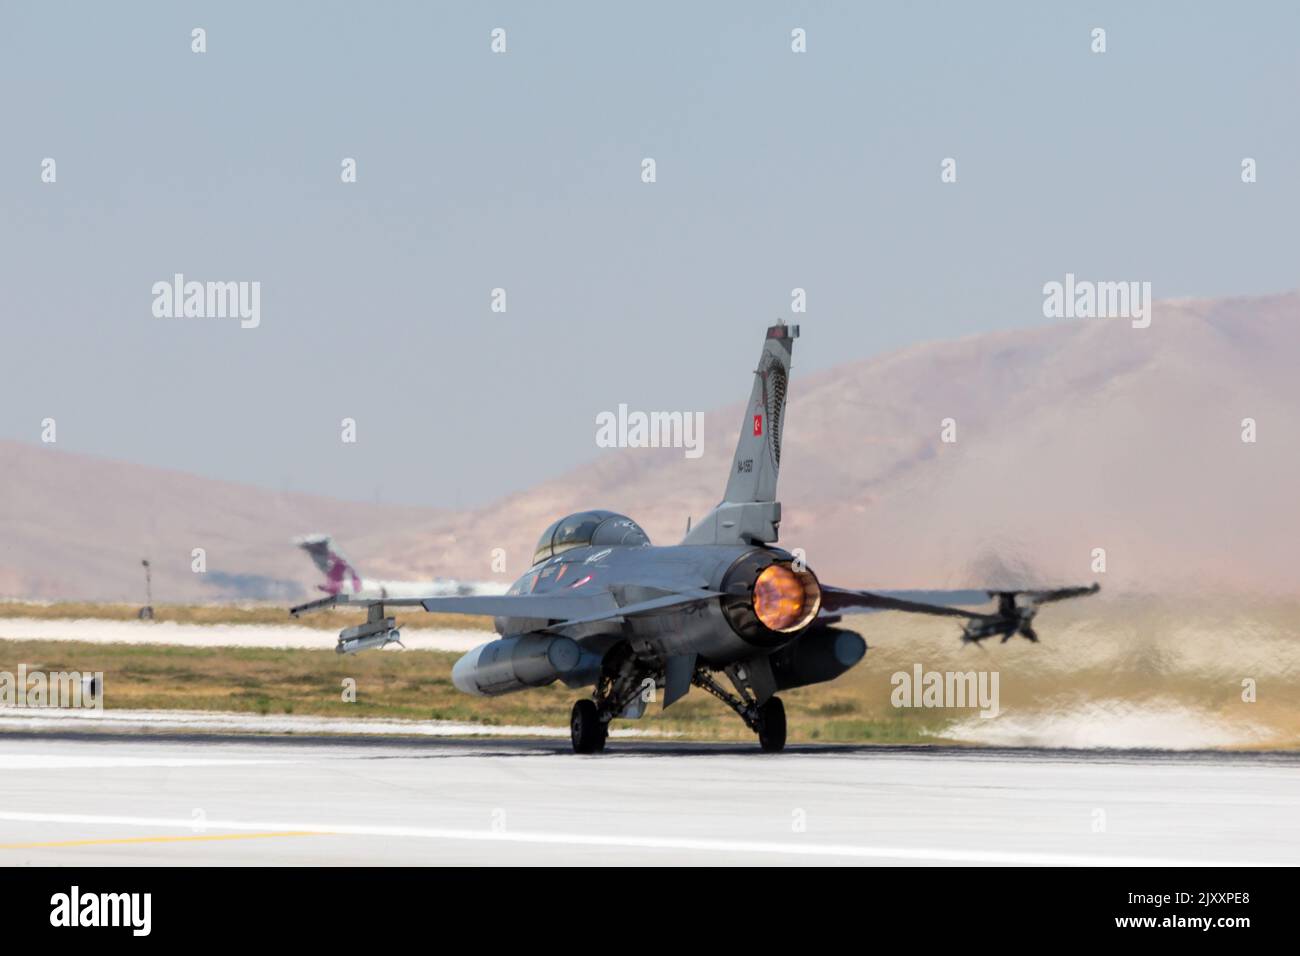 Konya, Turkey - 07 01 2021: Anatolian Eagle Air Force Exercise 2021  F16 Fighter jet n take-off position in Turkey Stock Photo